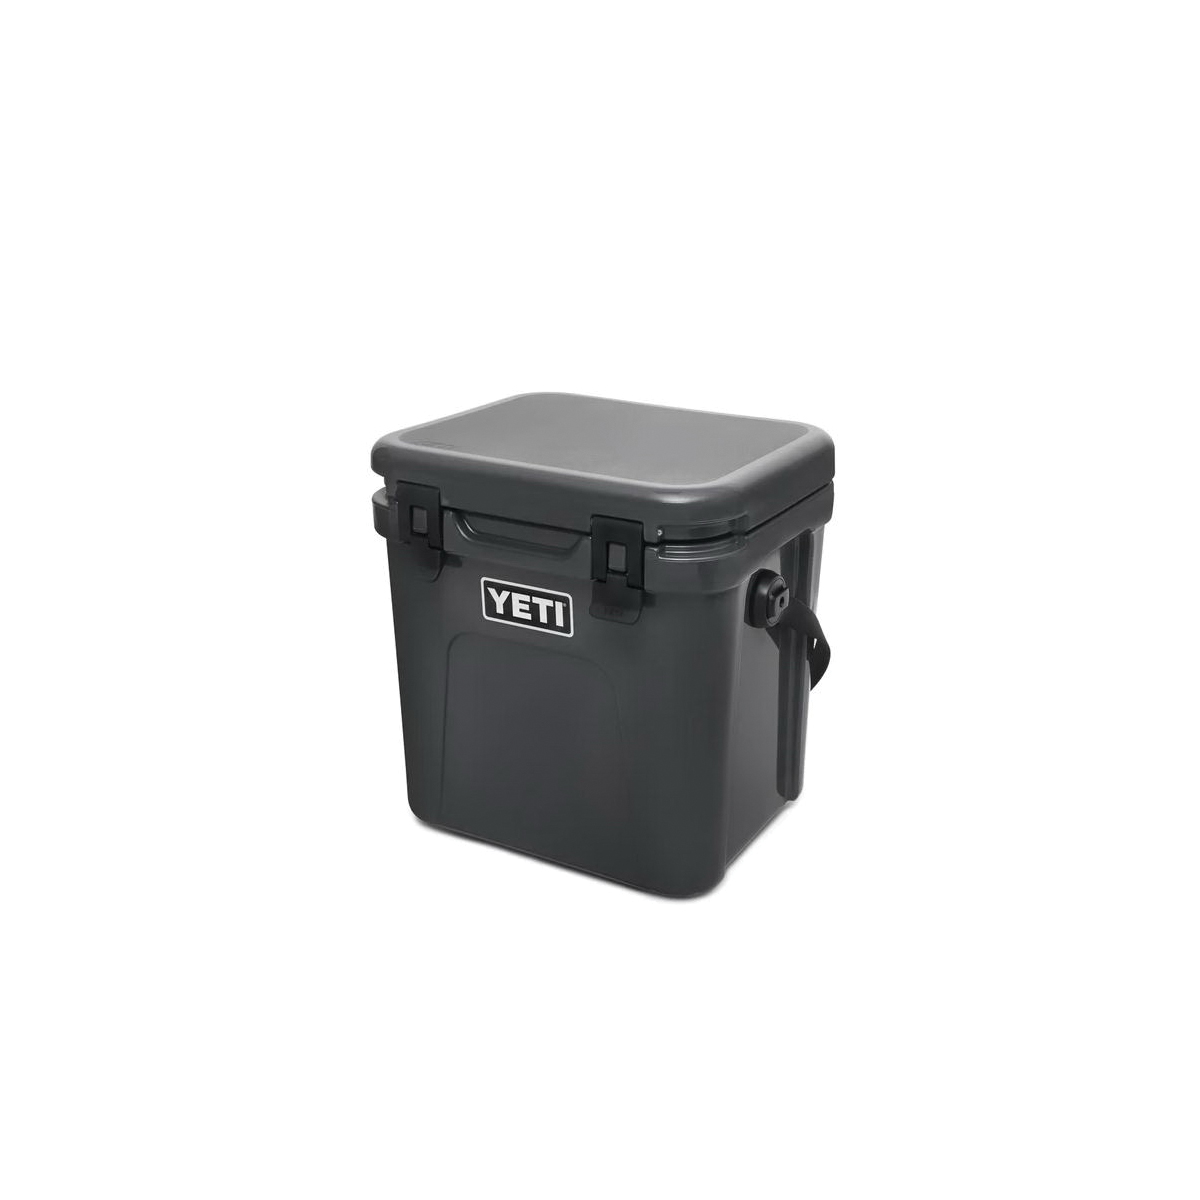 YETI Roadie 24 10022160000 Hard Cooler, 18 Can Cooler, Charcoal - 3